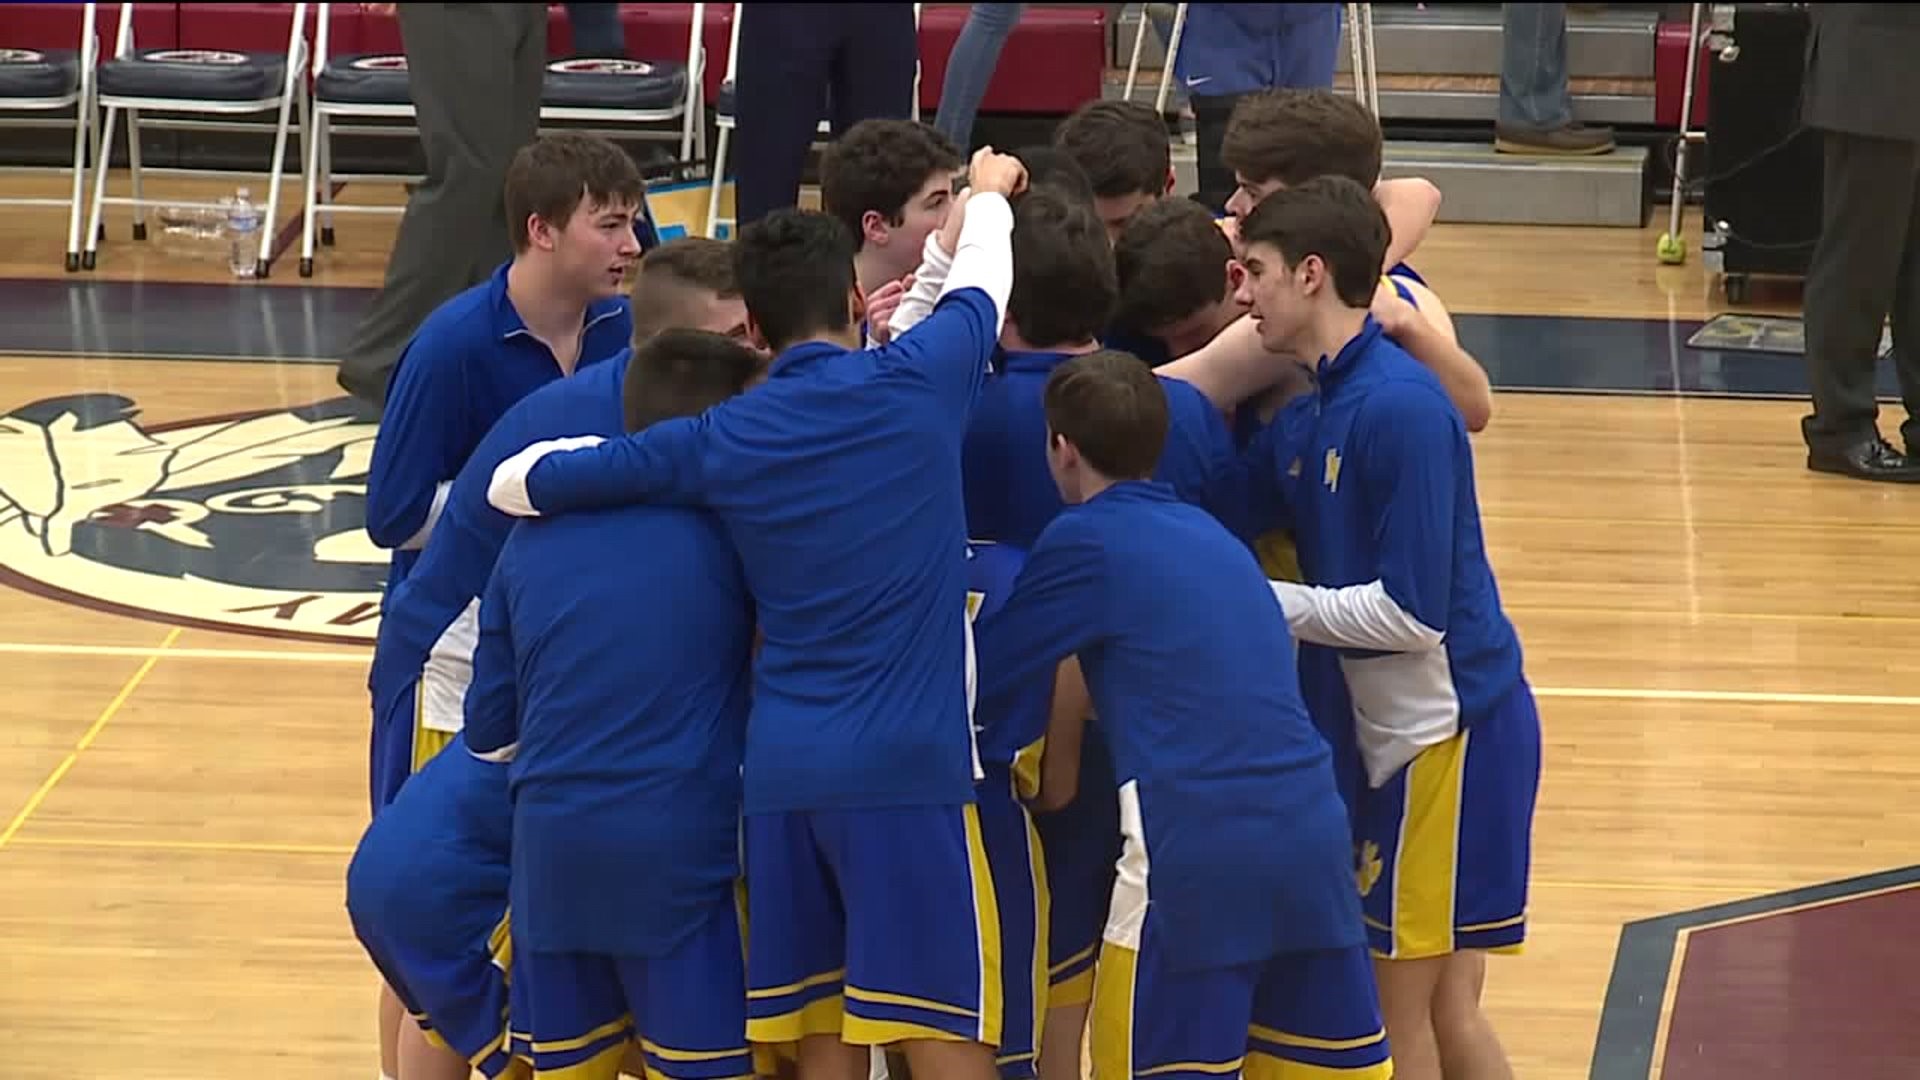 Valley View Boys Basketball Battle-Tested for States